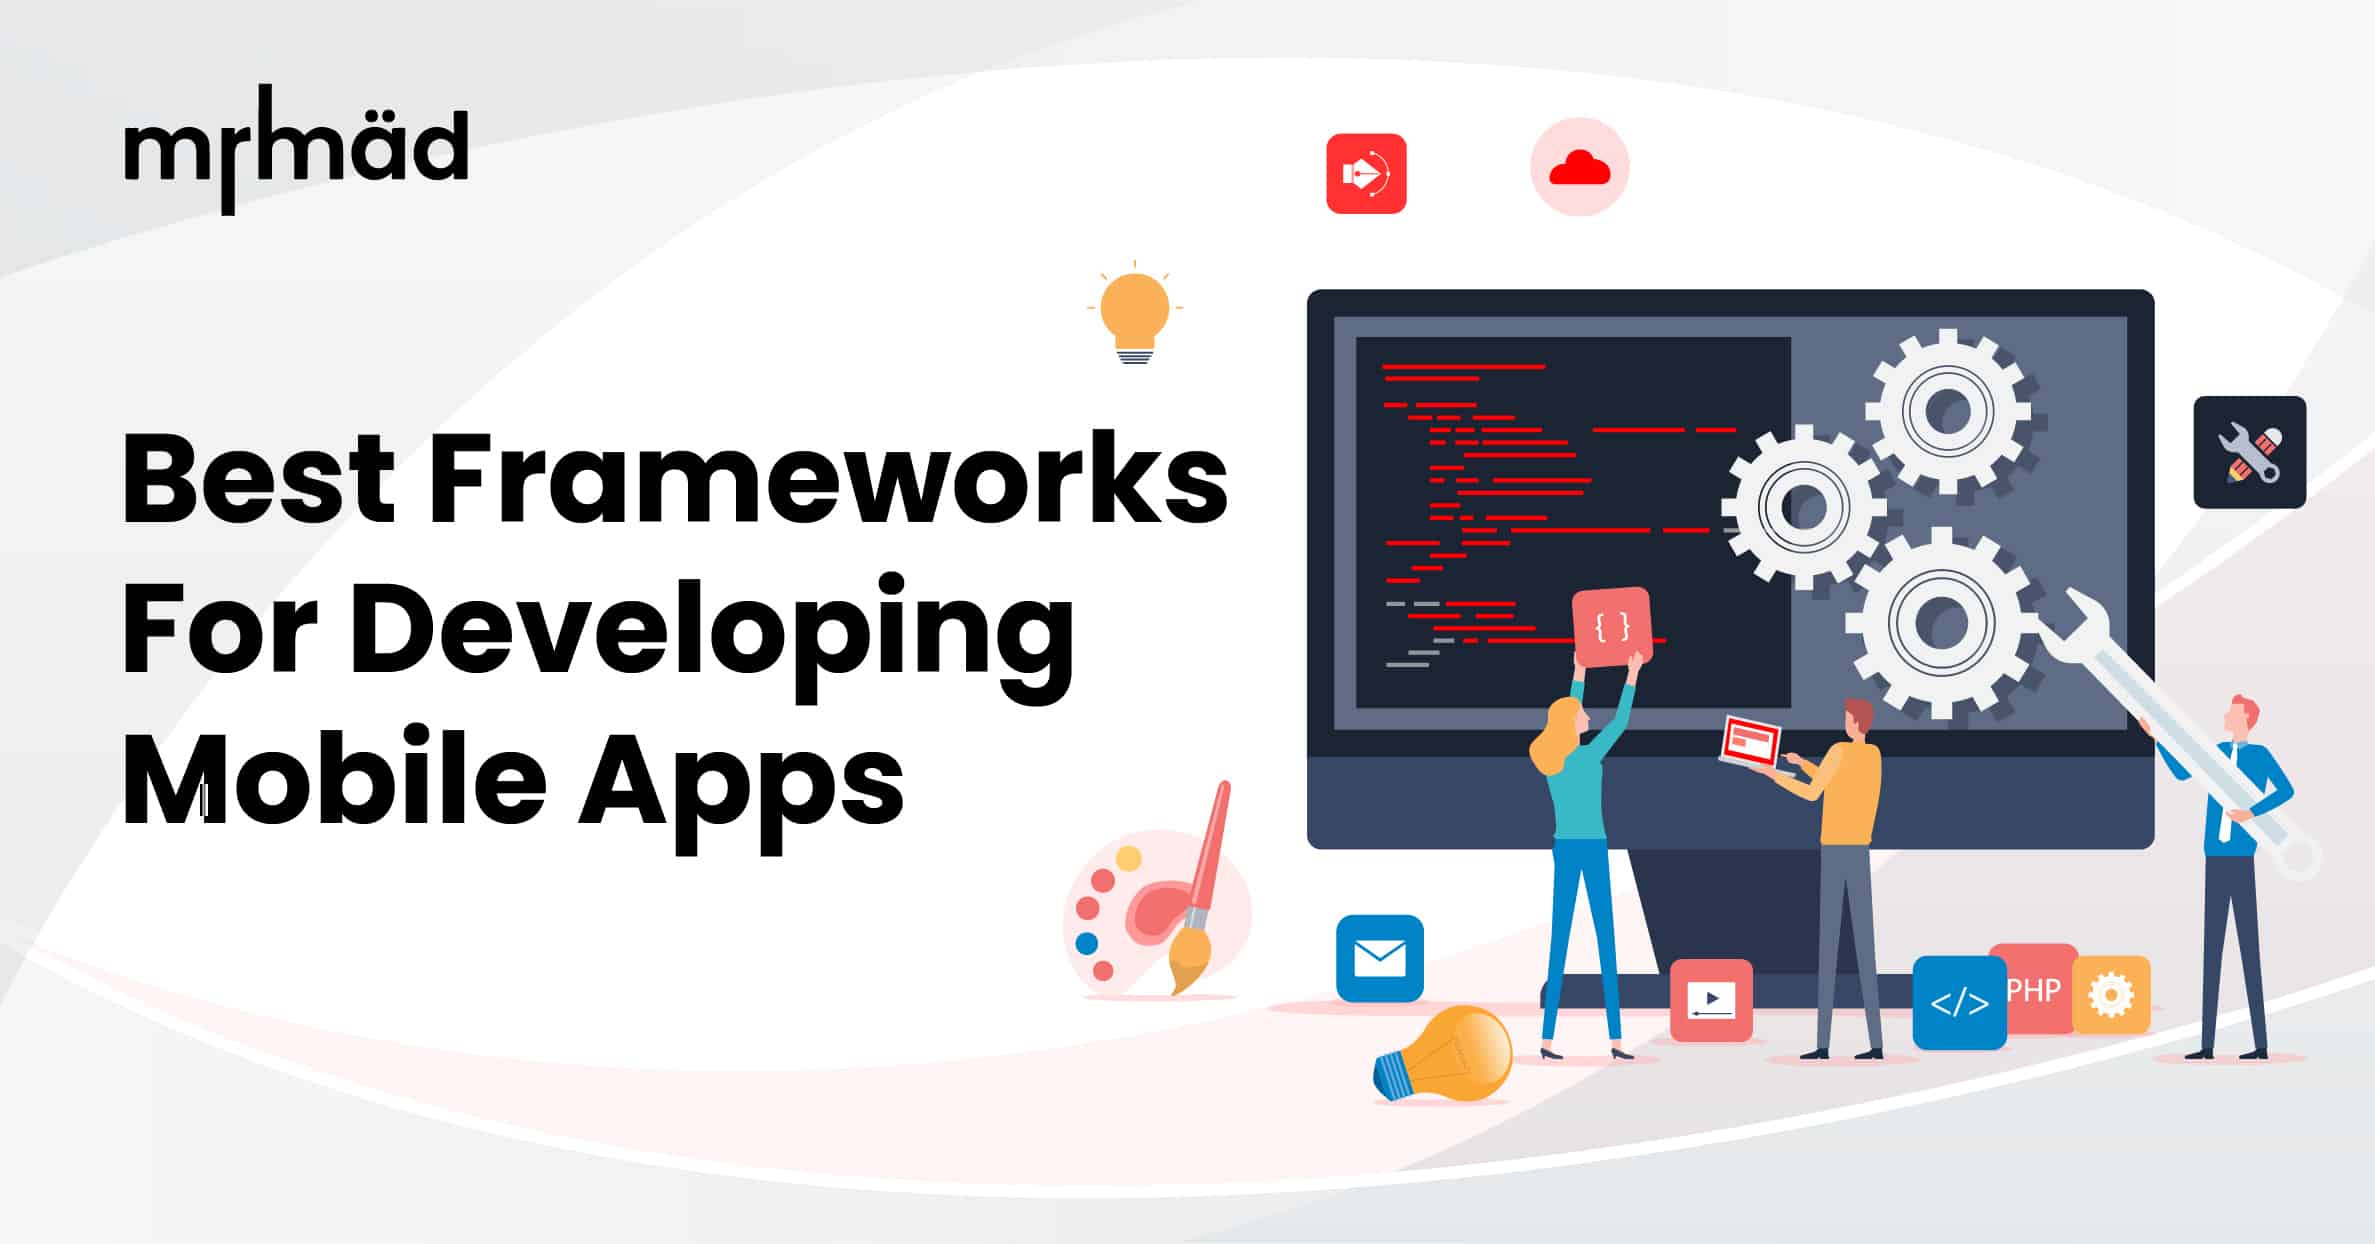 Hire a mobile app developer for your business to develop an app